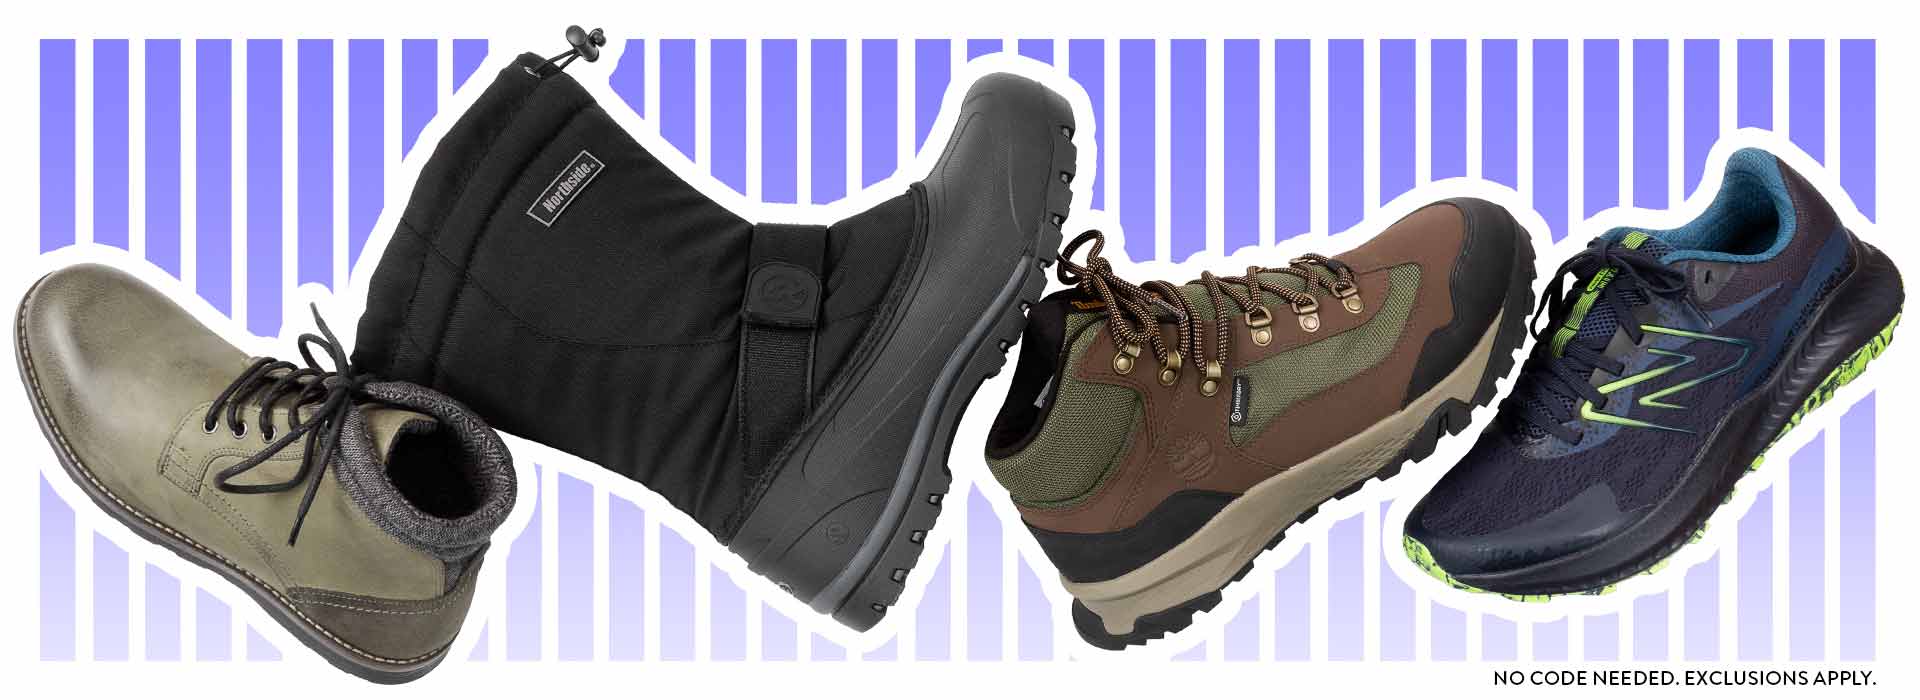 Save on an extra 10% off on mens athletic shoes, mens casual shoes, and more!